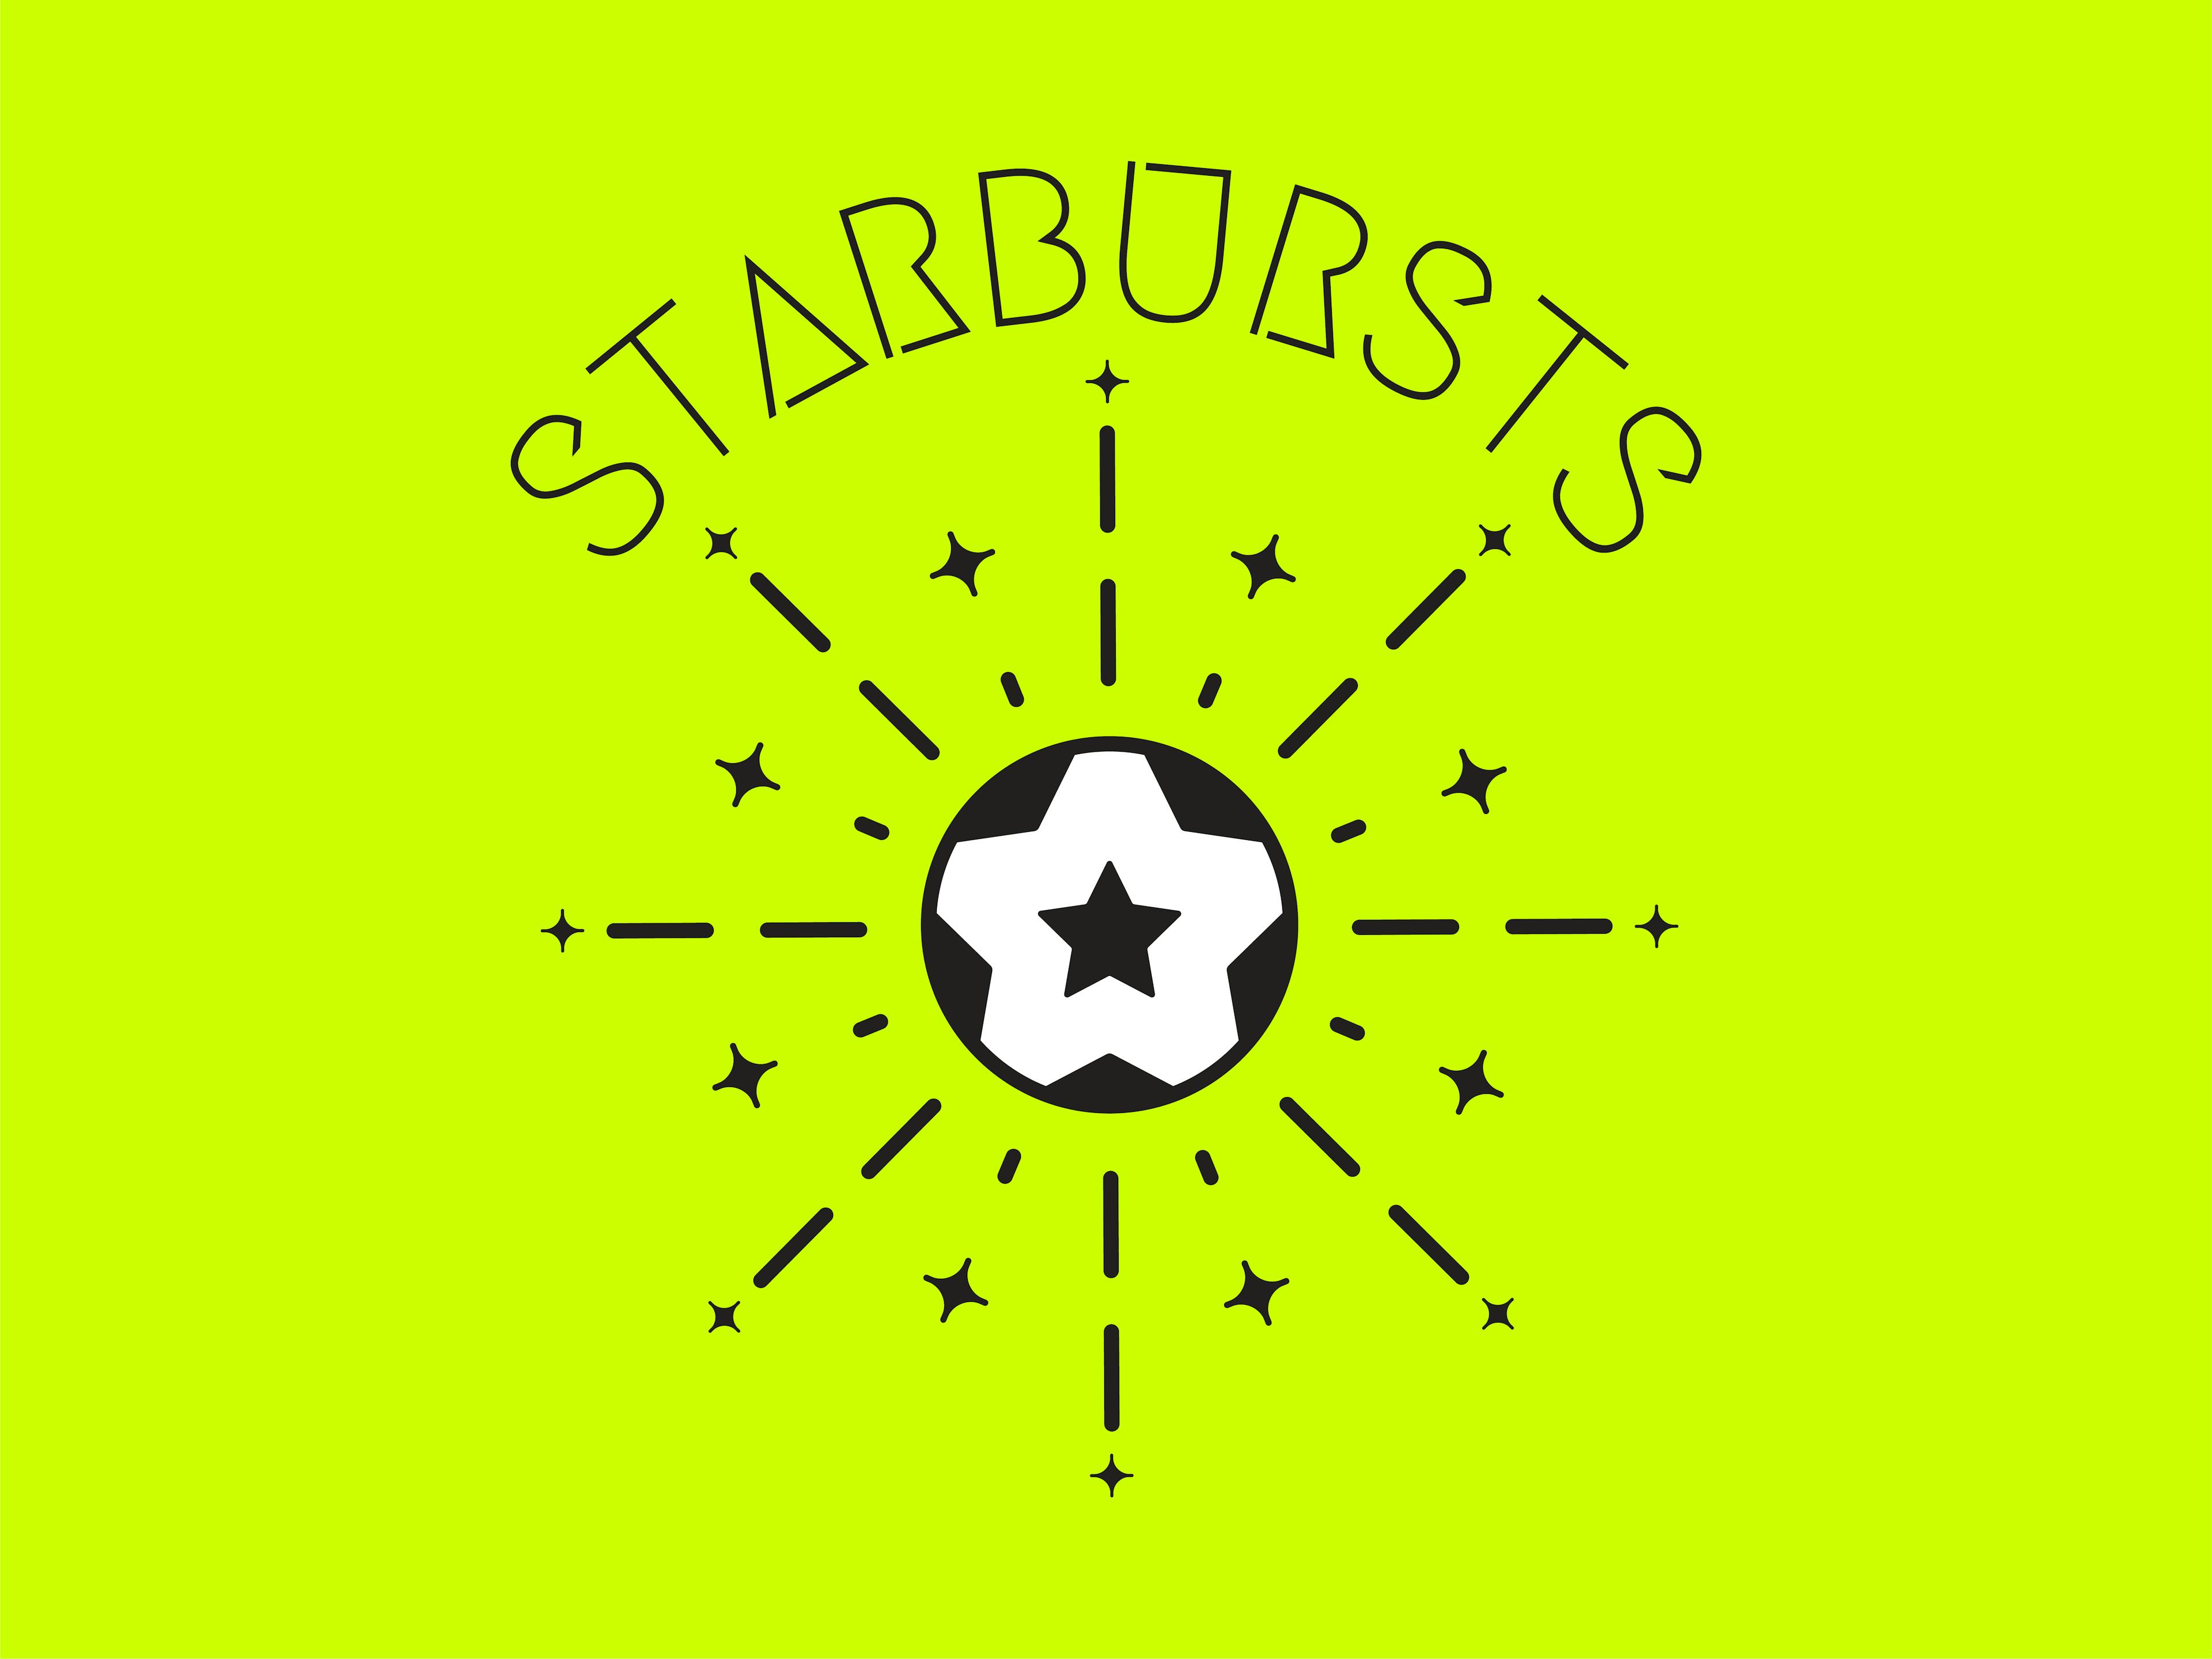 Cover Image for Starbursts